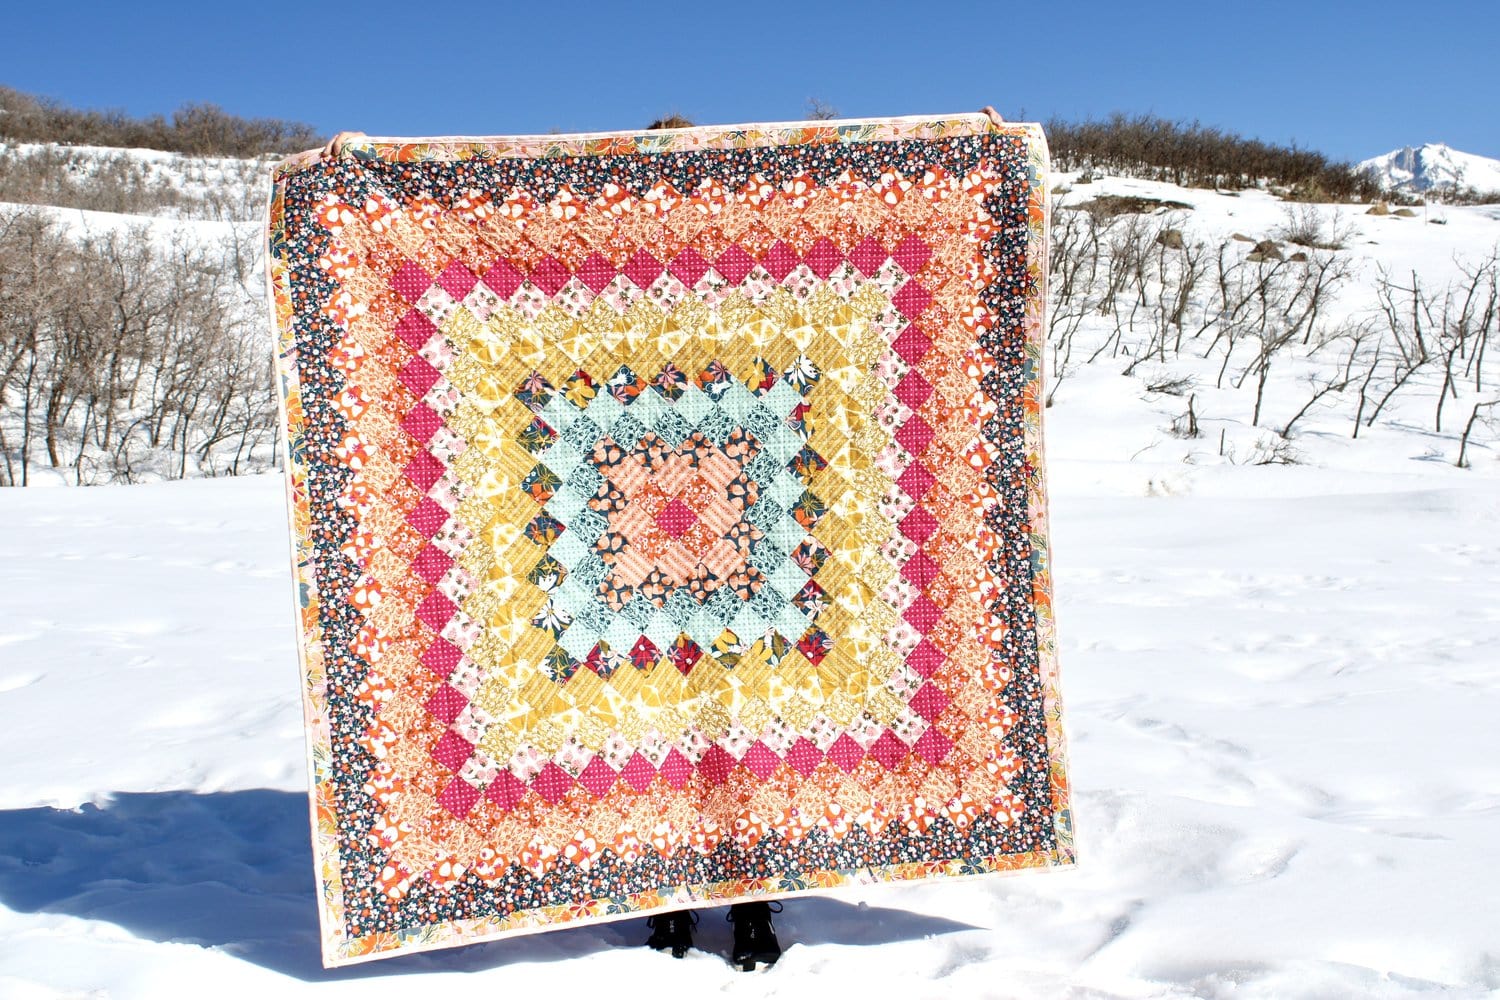 colorful patchwork quilt pattern outdoors in snow